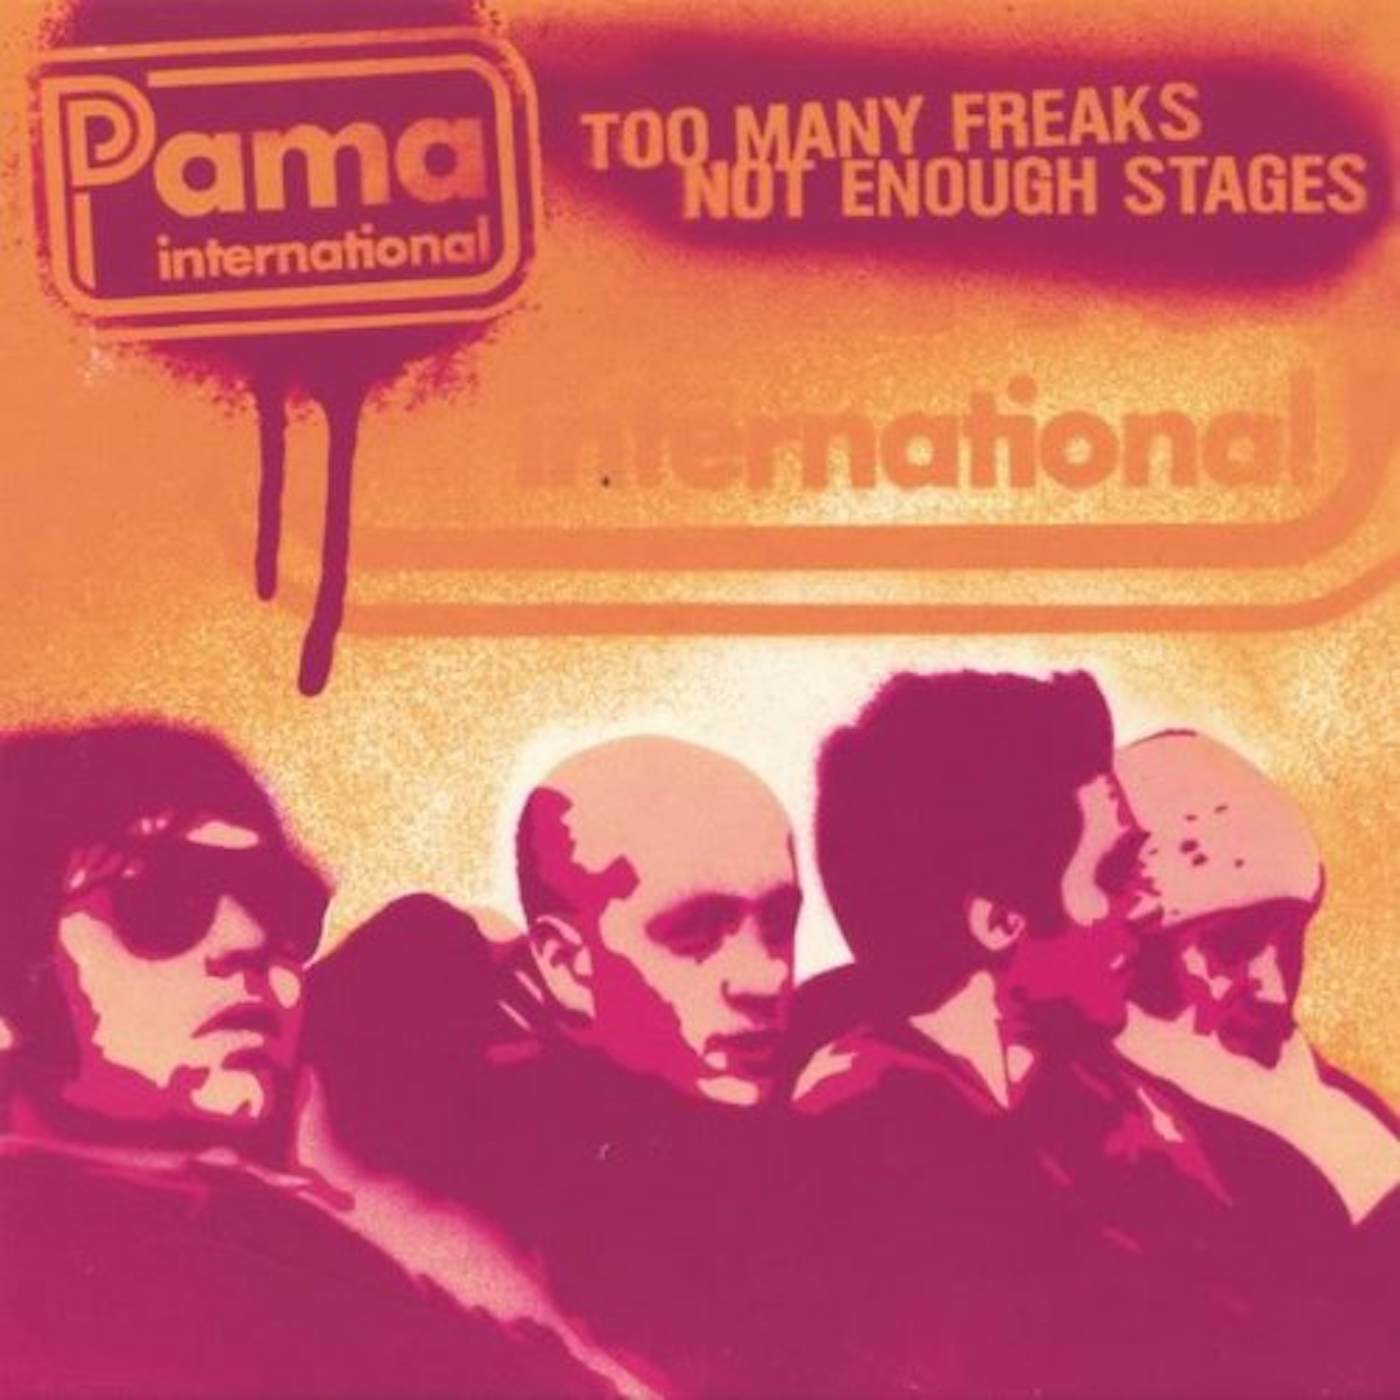 Pama International TOO MANY FREAKS NOT ENOUGH STAGES CD